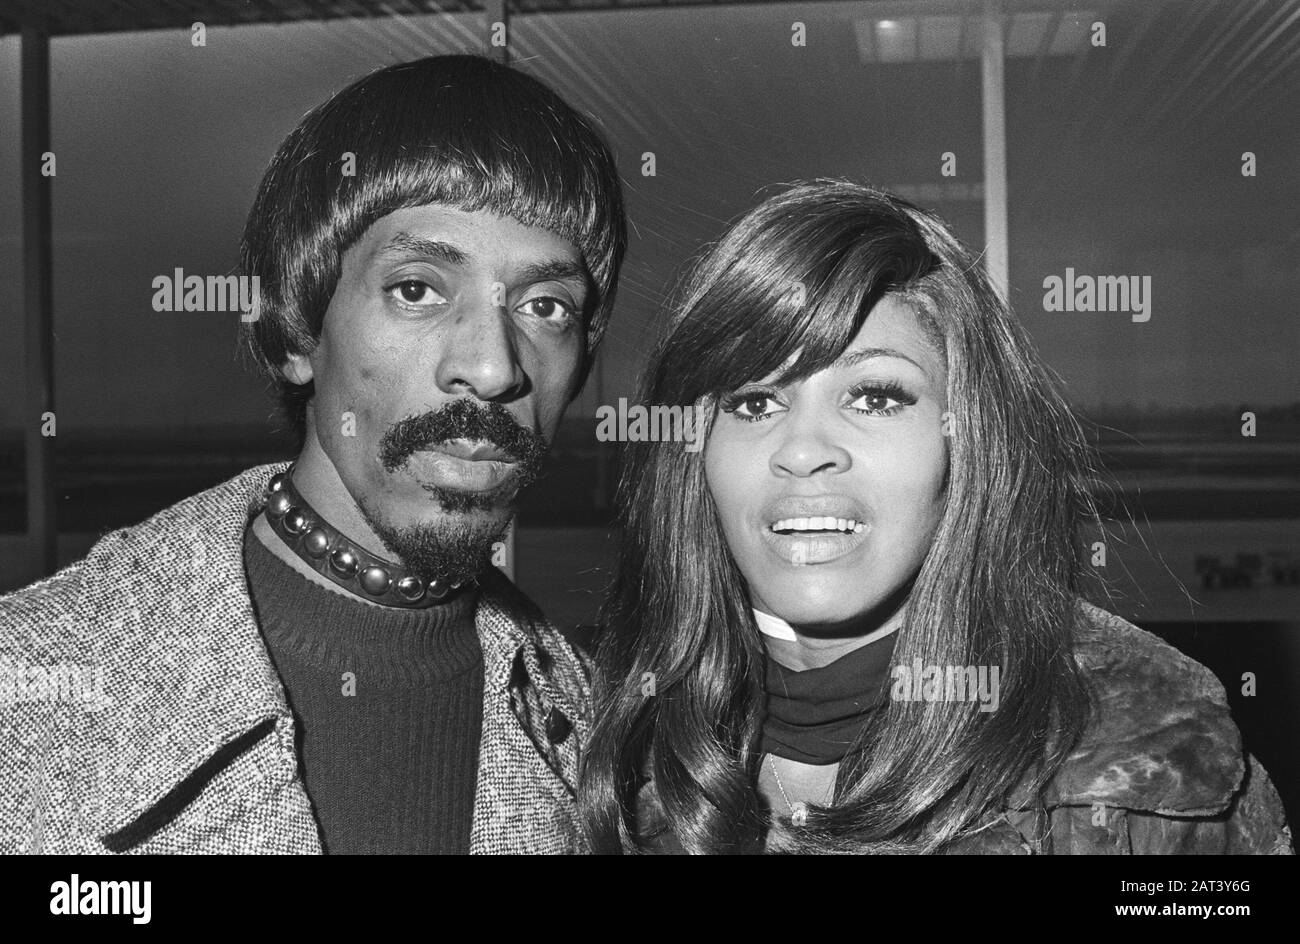 American duo Ike and Tina Turner arrive at Schiphol  Ike & Tina Turner Date: 28 January 1971 Location: Noord-Holland, Schiphol Keywords: pop musicians, portraits Personal name: Turner, Ike, Turner, Tina Institution name: Schiphol Stock Photo